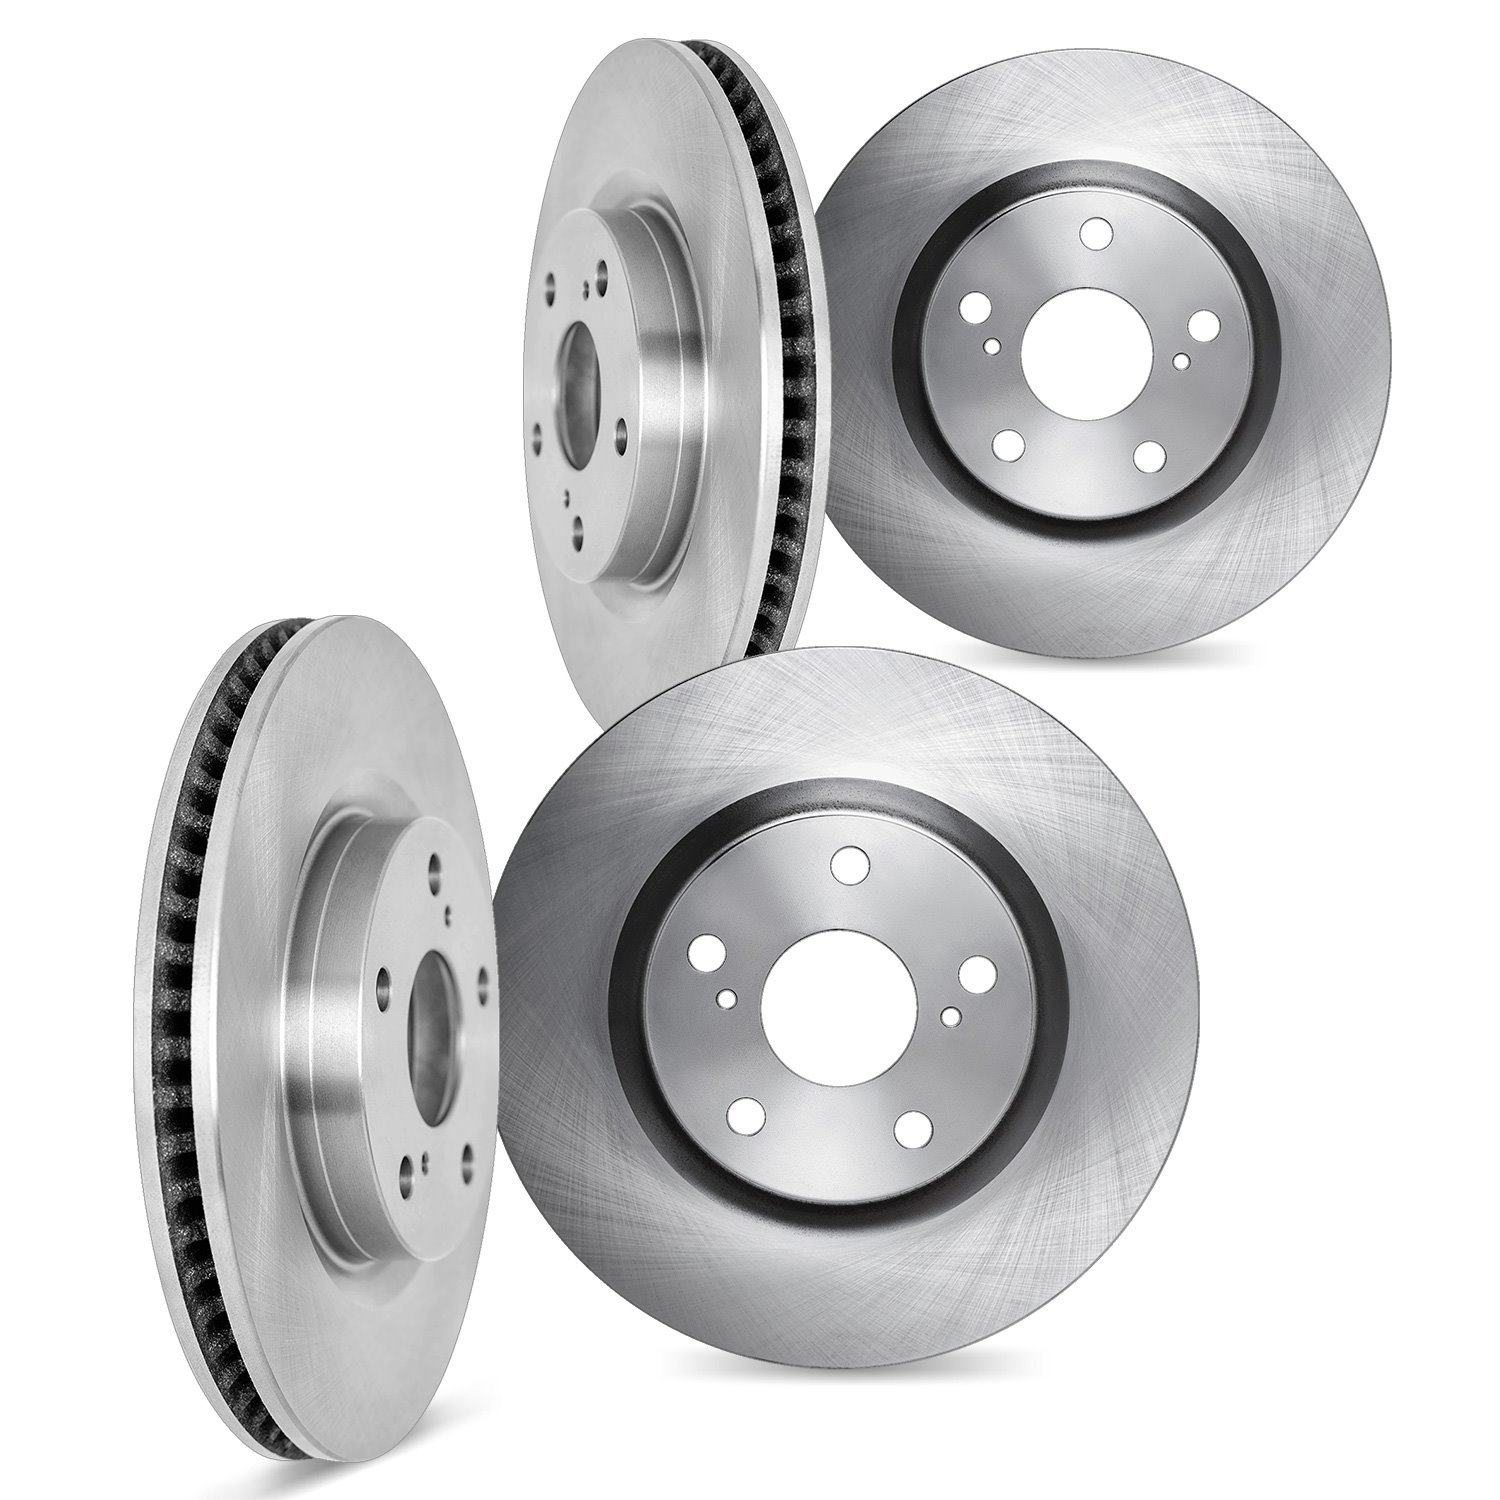 6004-67122 Brake Rotors, Fits Select Infiniti/Nissan, Position: Front and Rear